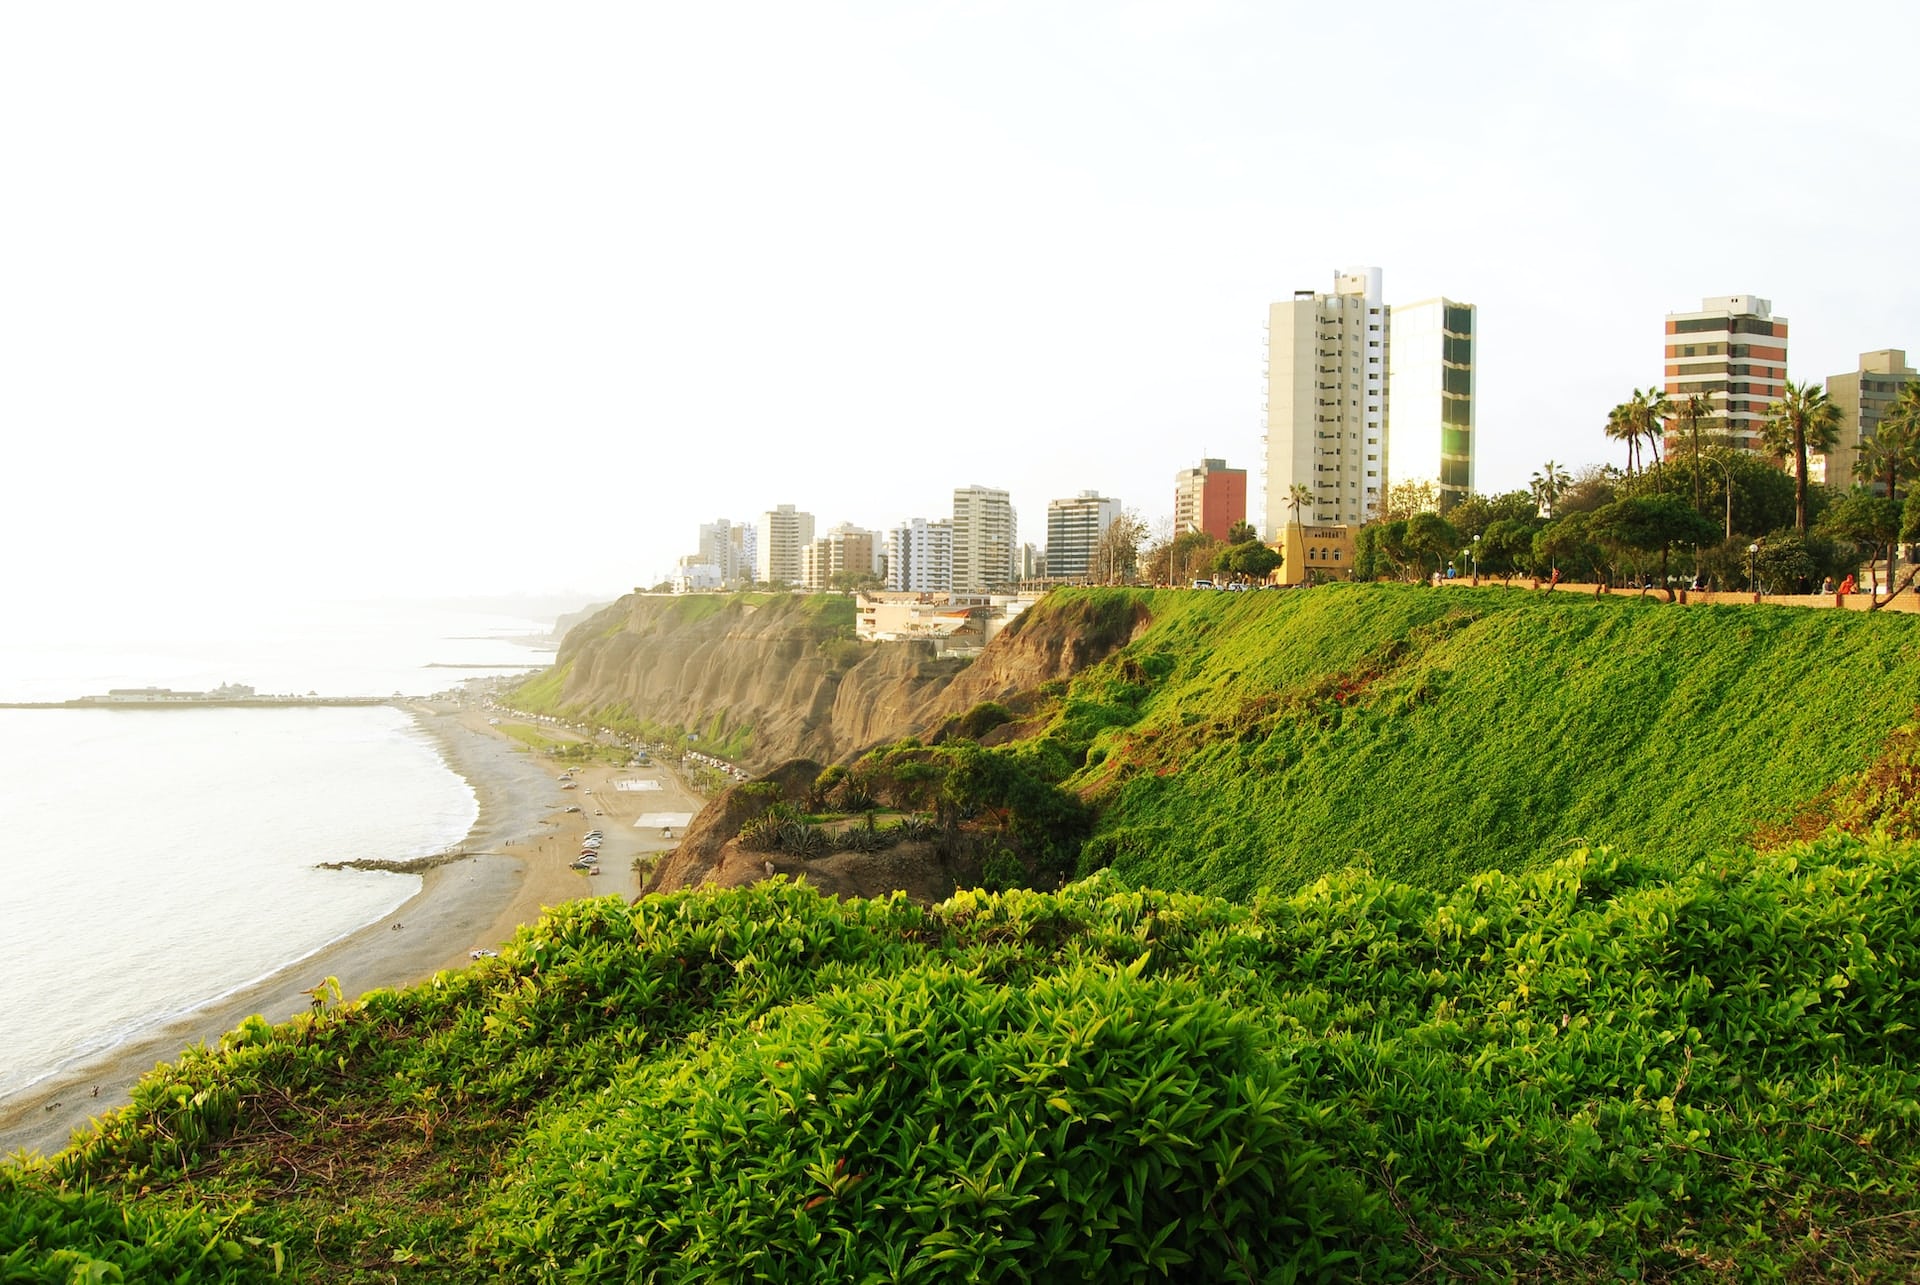 Known for its vibrant atmosphere, beautiful landscapes, and safe environment, Miraflores is one of the best areas to stay in Lima.